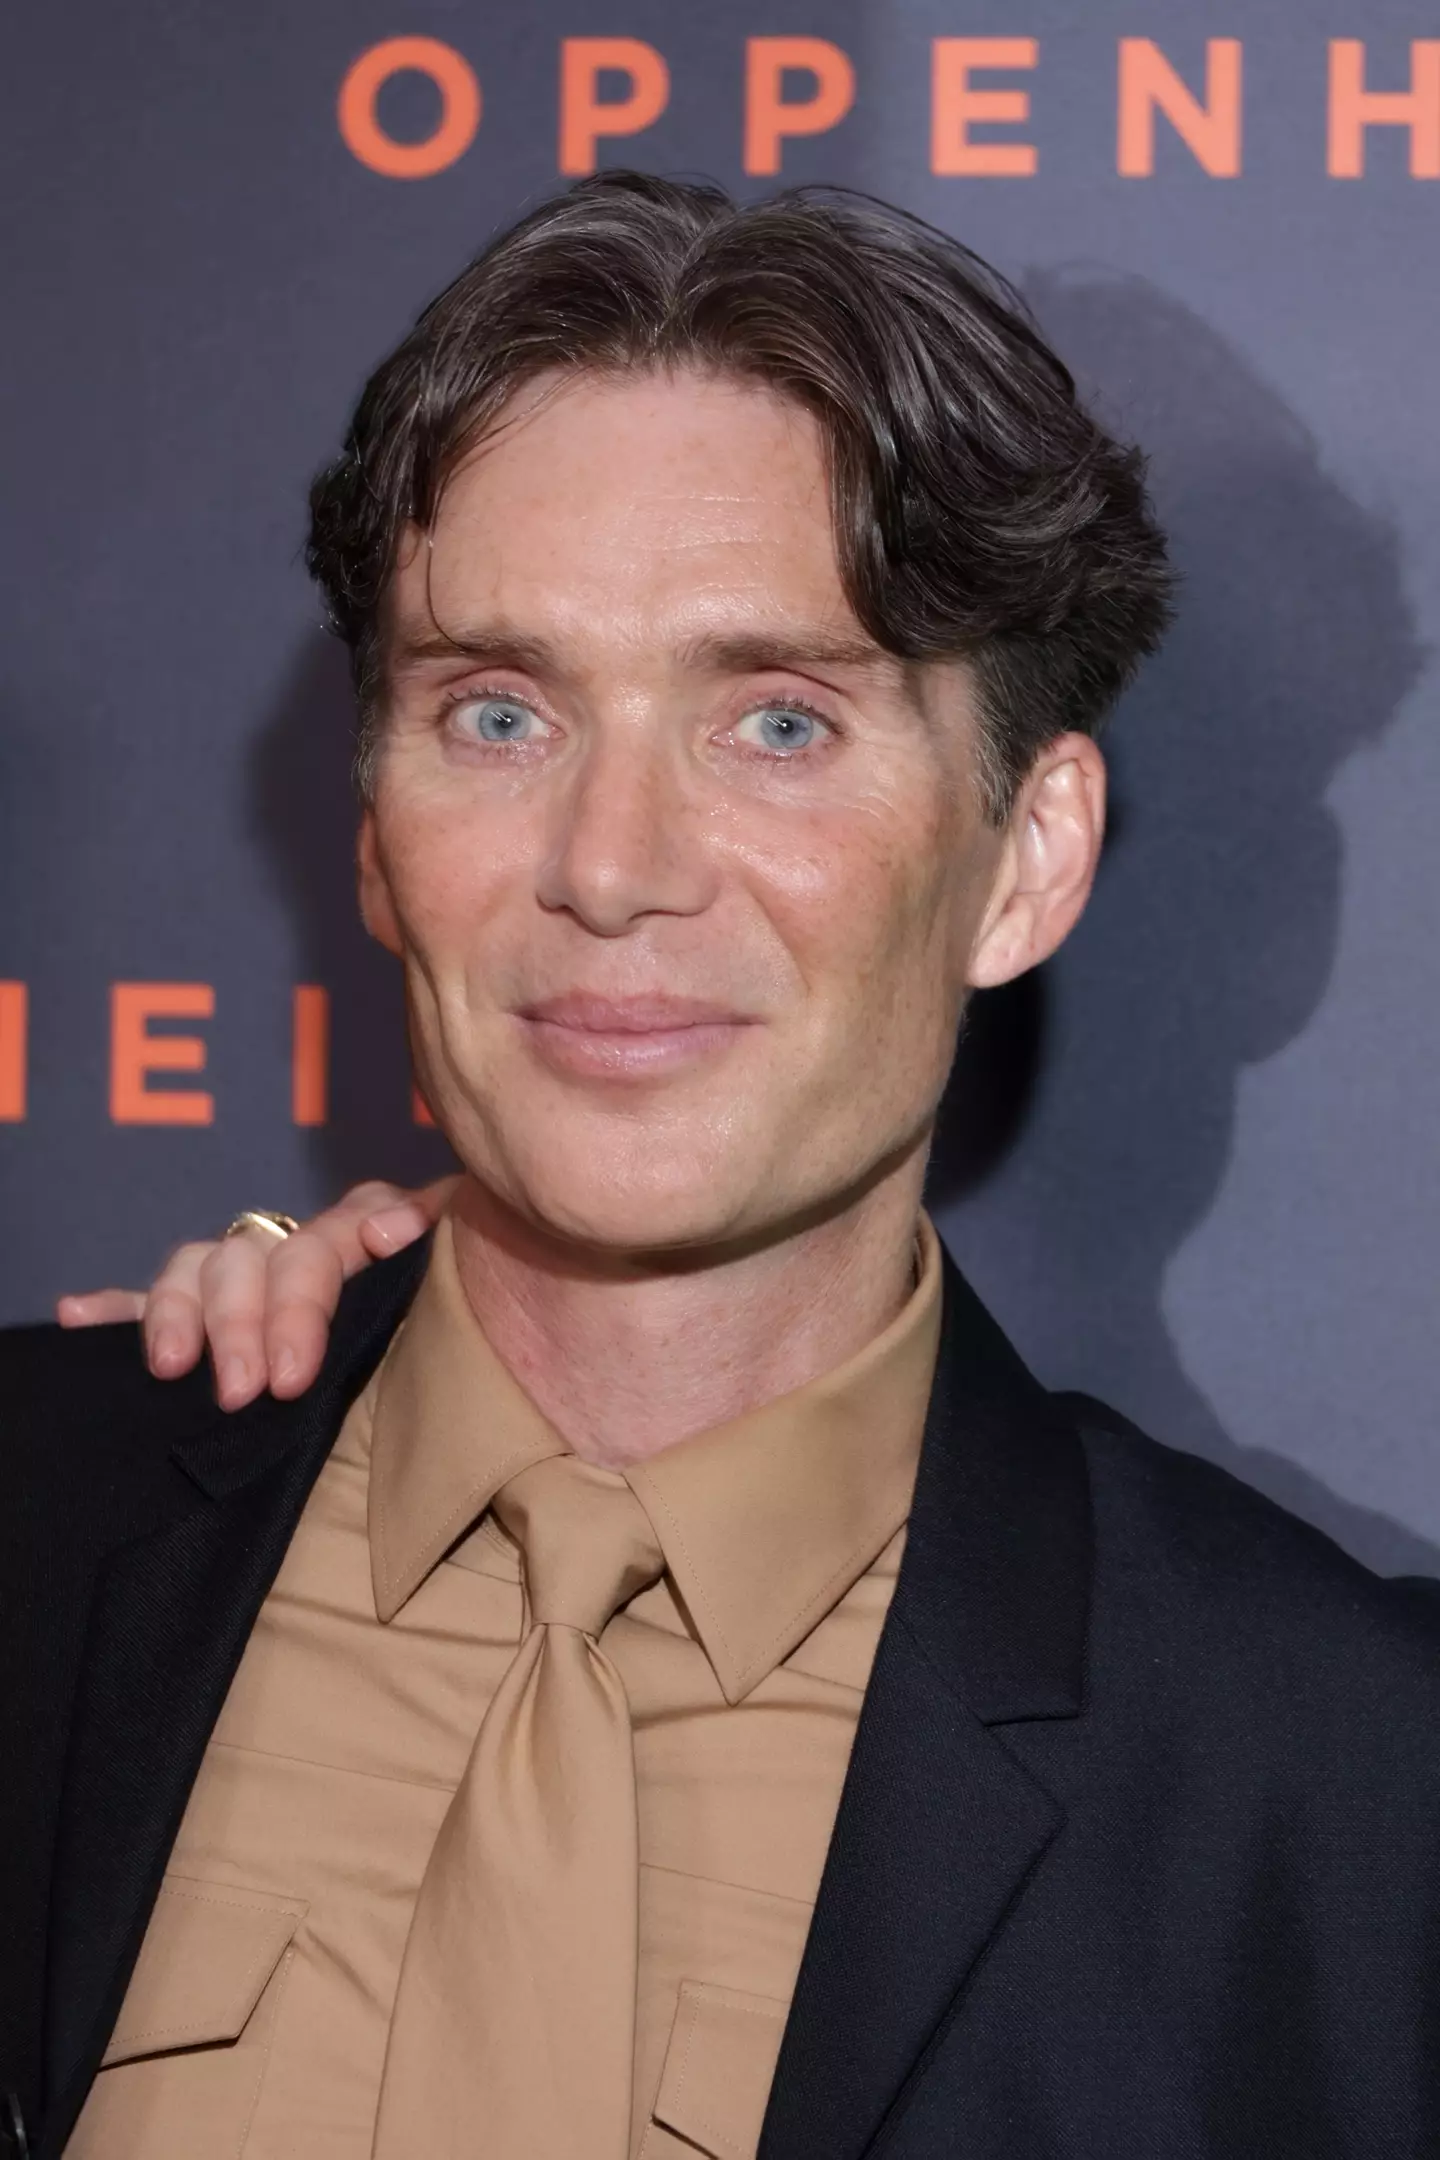 Cillian Murphy was first on the chopping board.